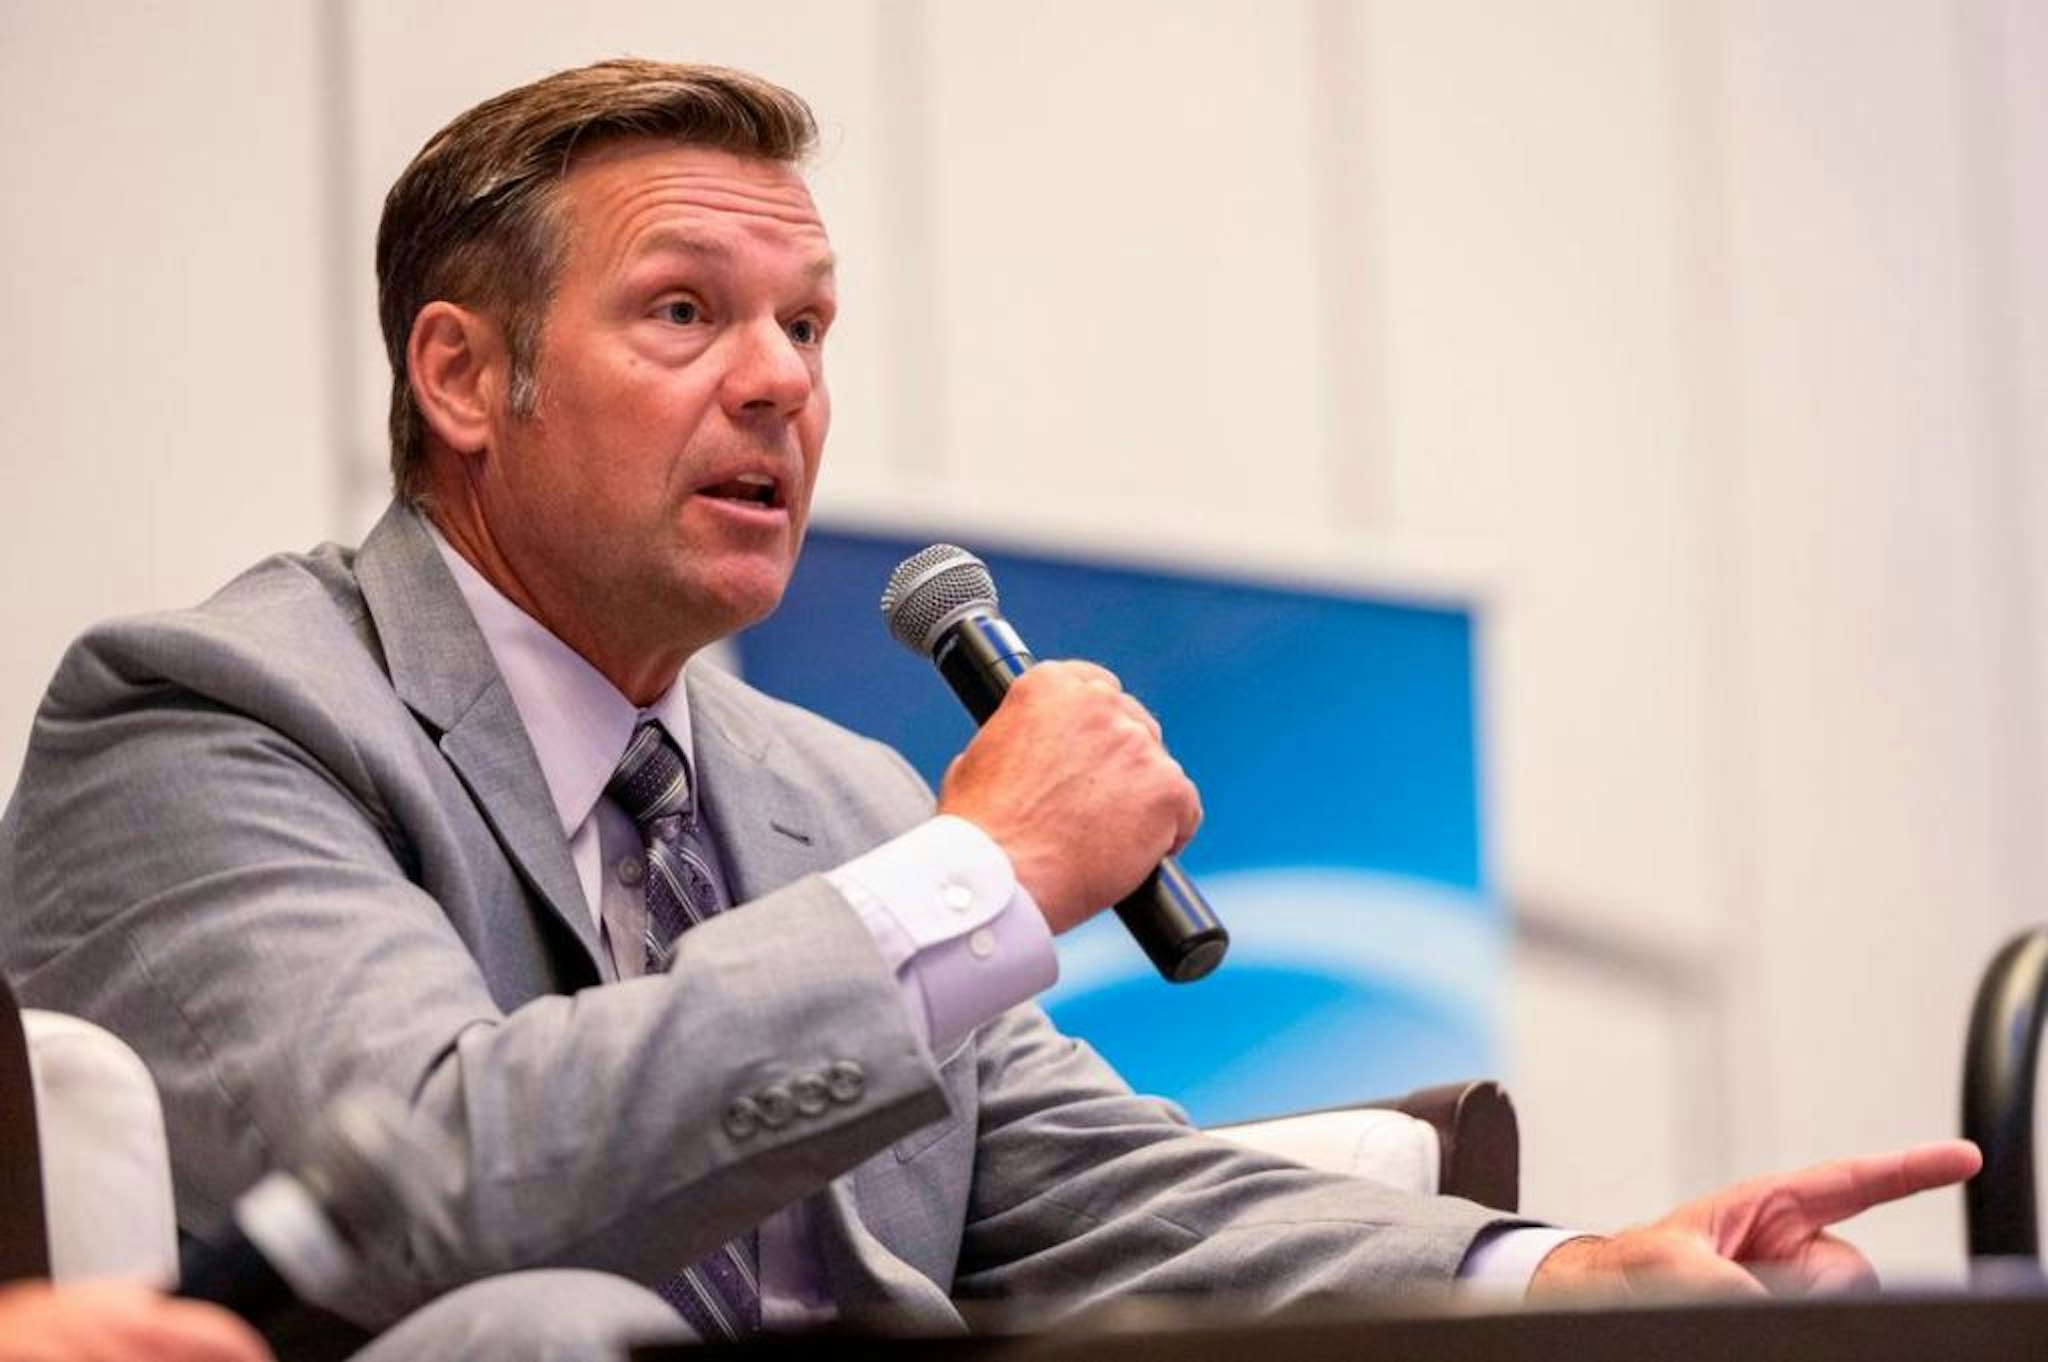 Former Kansas Secretary of State Kris Kobach answers questions from a moderator during a Kansas Chamber of Commerce event at the Embassy Suites by Hilton on Wednesday, Sep. 7, 2022, in Olathe.